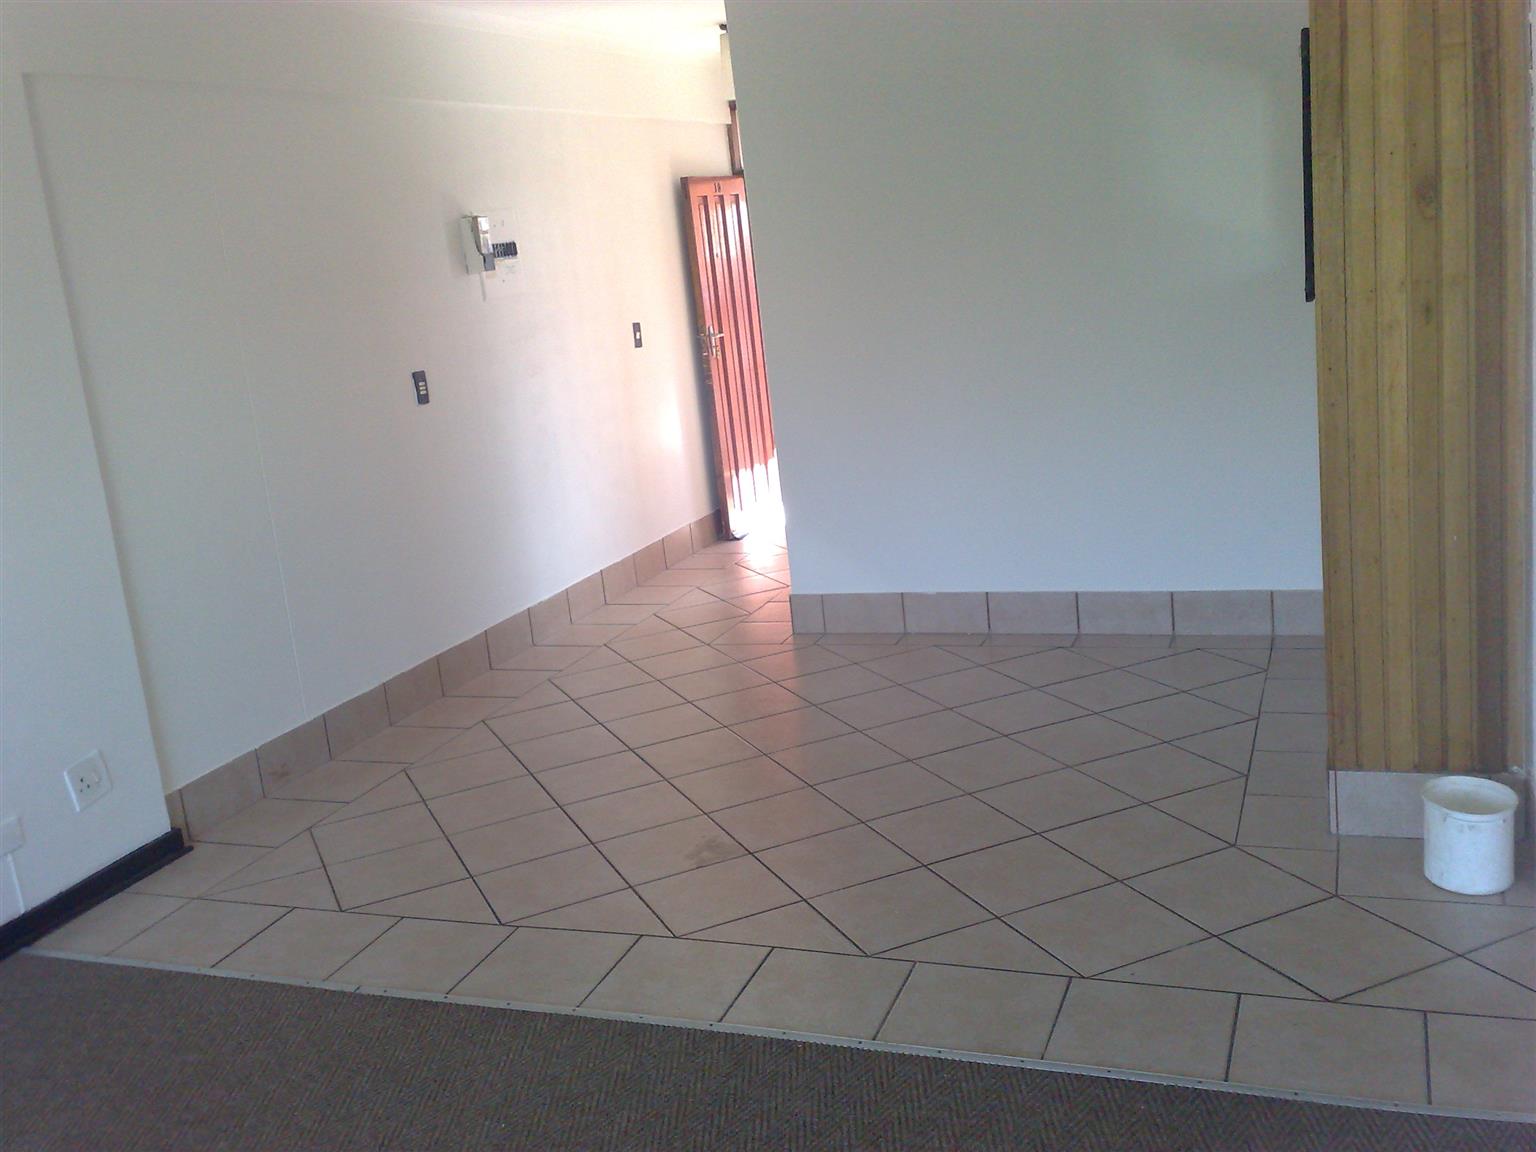 Krugersdorp:2 x bedroomed apartment Newly Refurbished Clean -  Pre paid electric